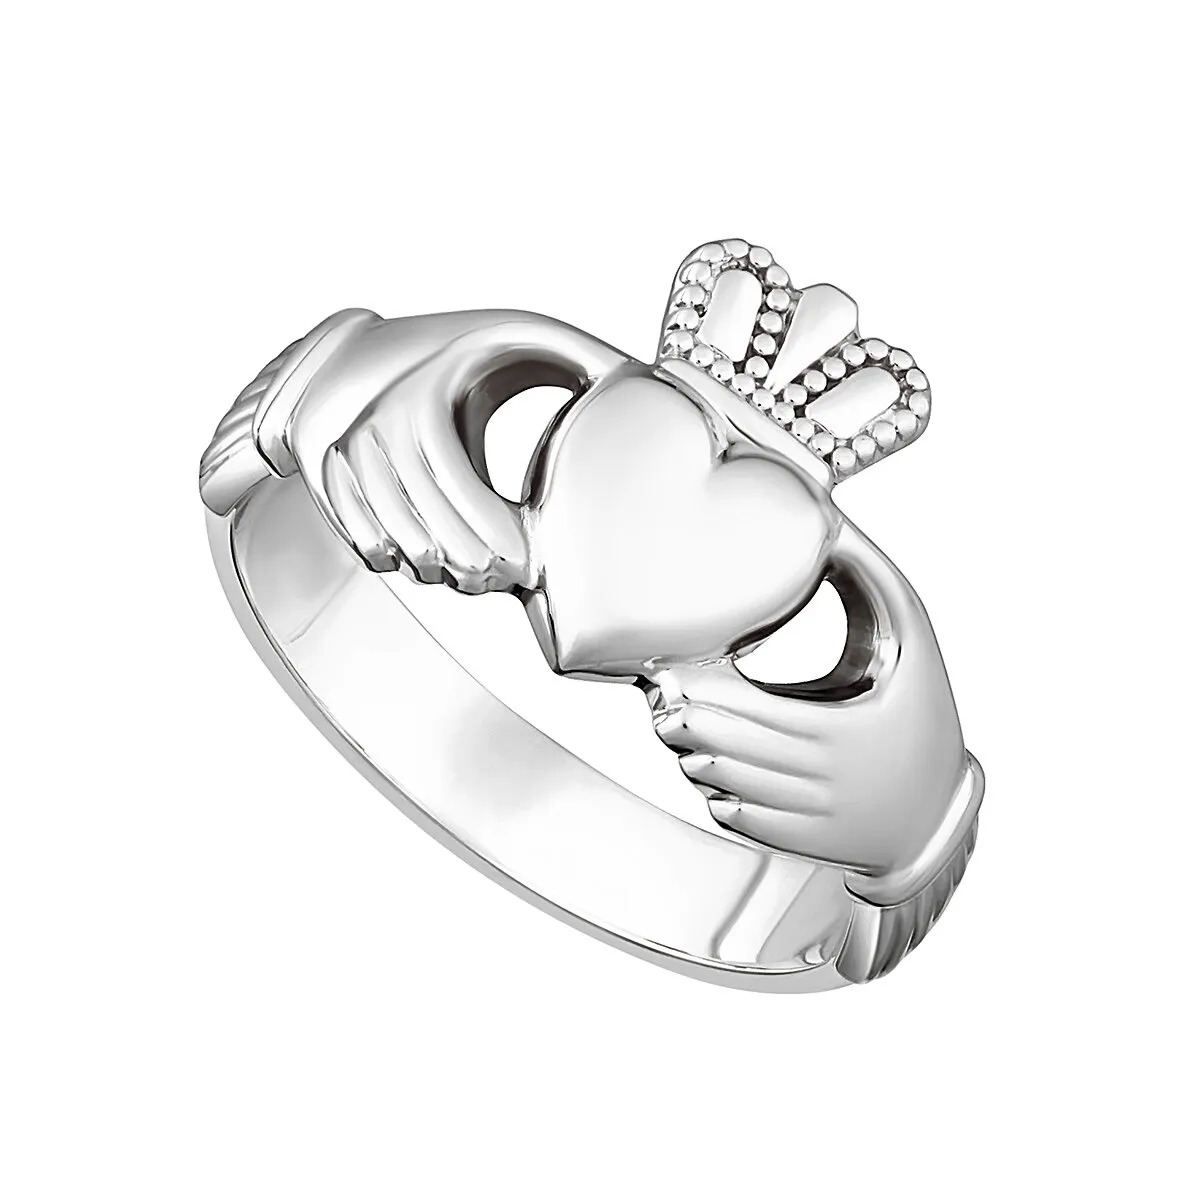 Mens Sterling Silver Claddagh Ring...